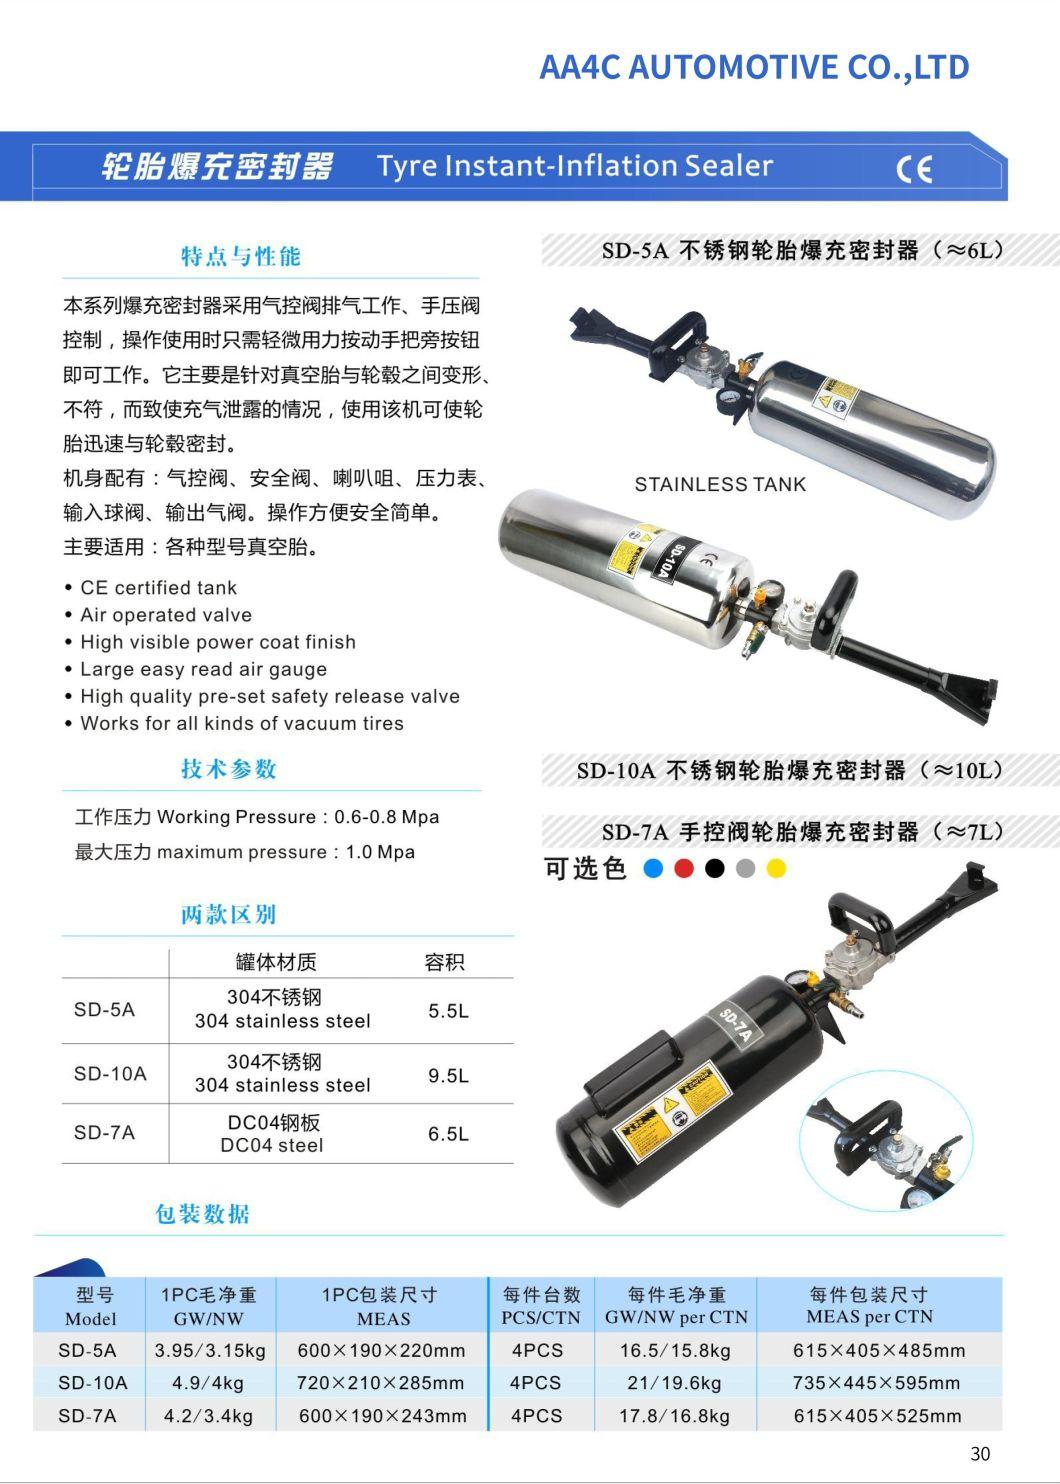 AA4c High Quality Tire Vulcanizer Tire Spreader Tire Repair Tools Tyre Instant-Inflation Sealer AA-SD-5A